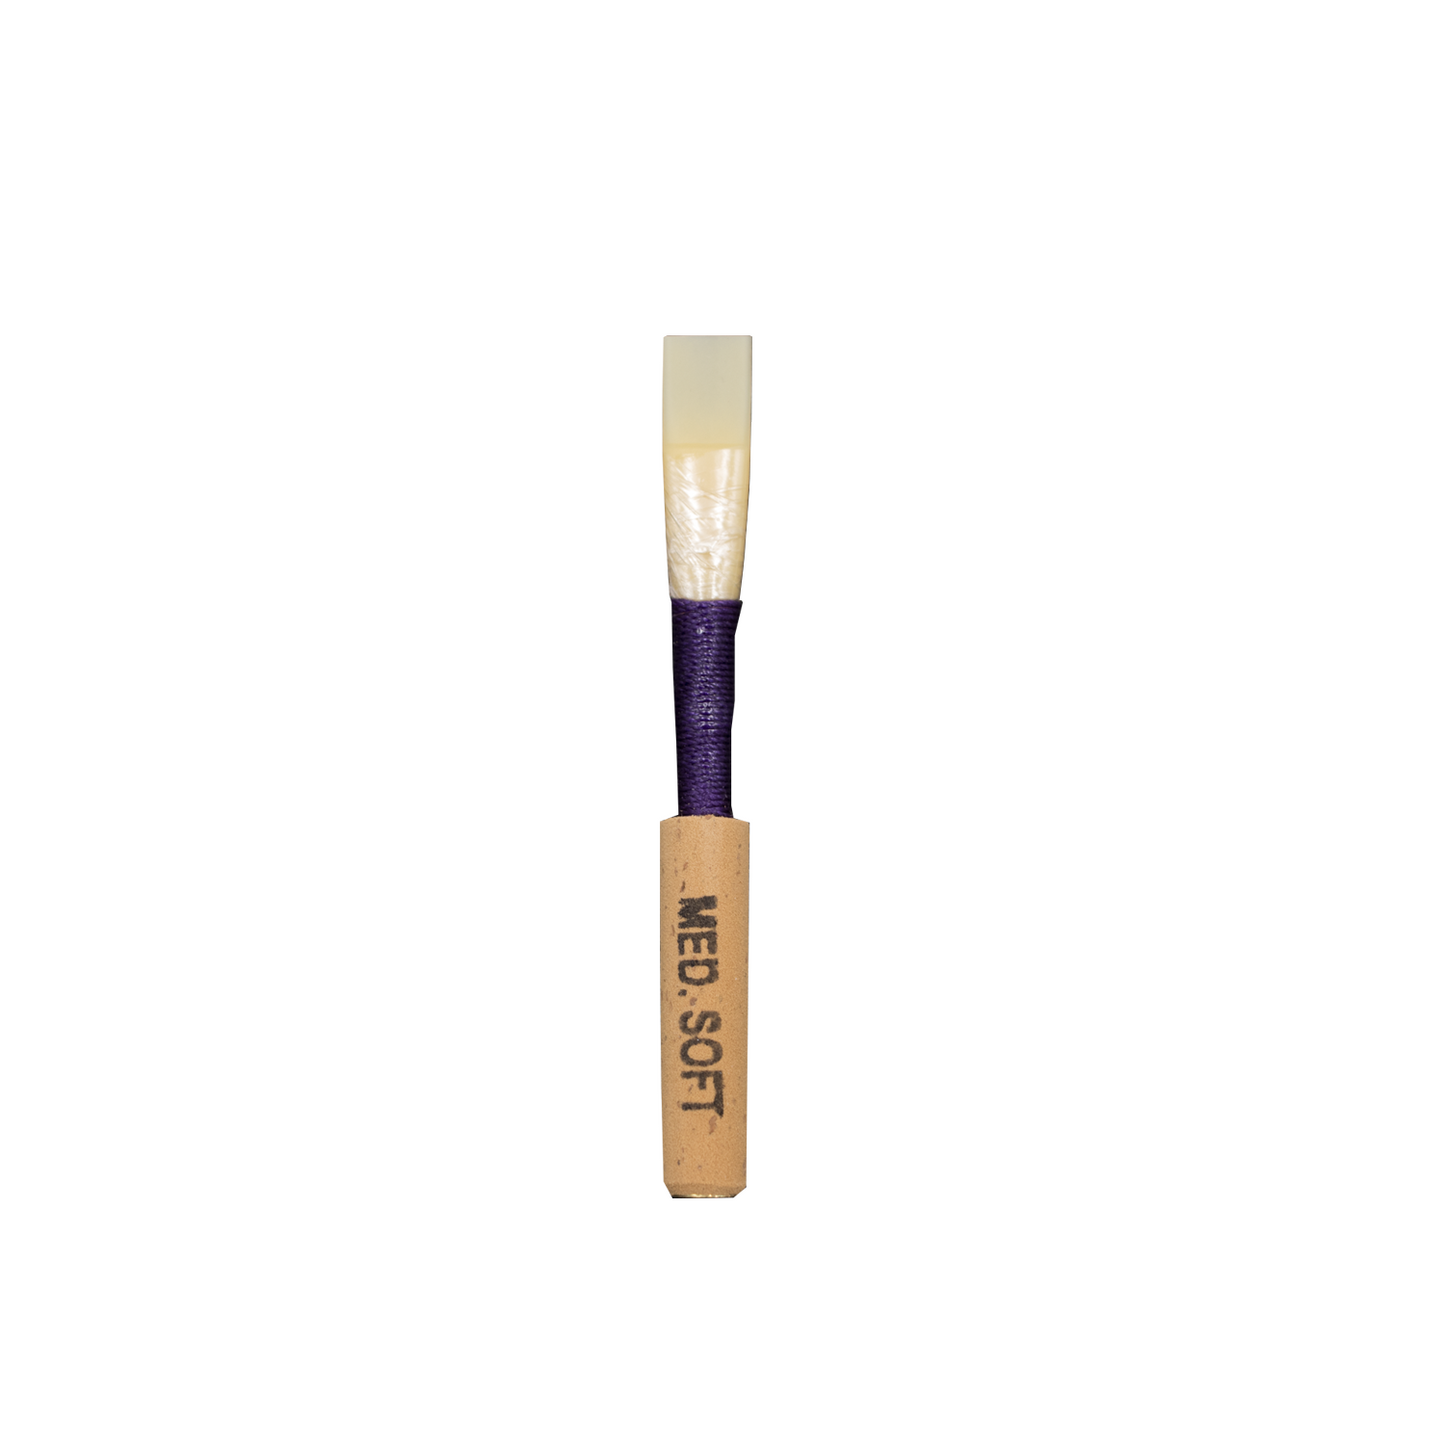 Faxx Oboe Reed, Synthetic